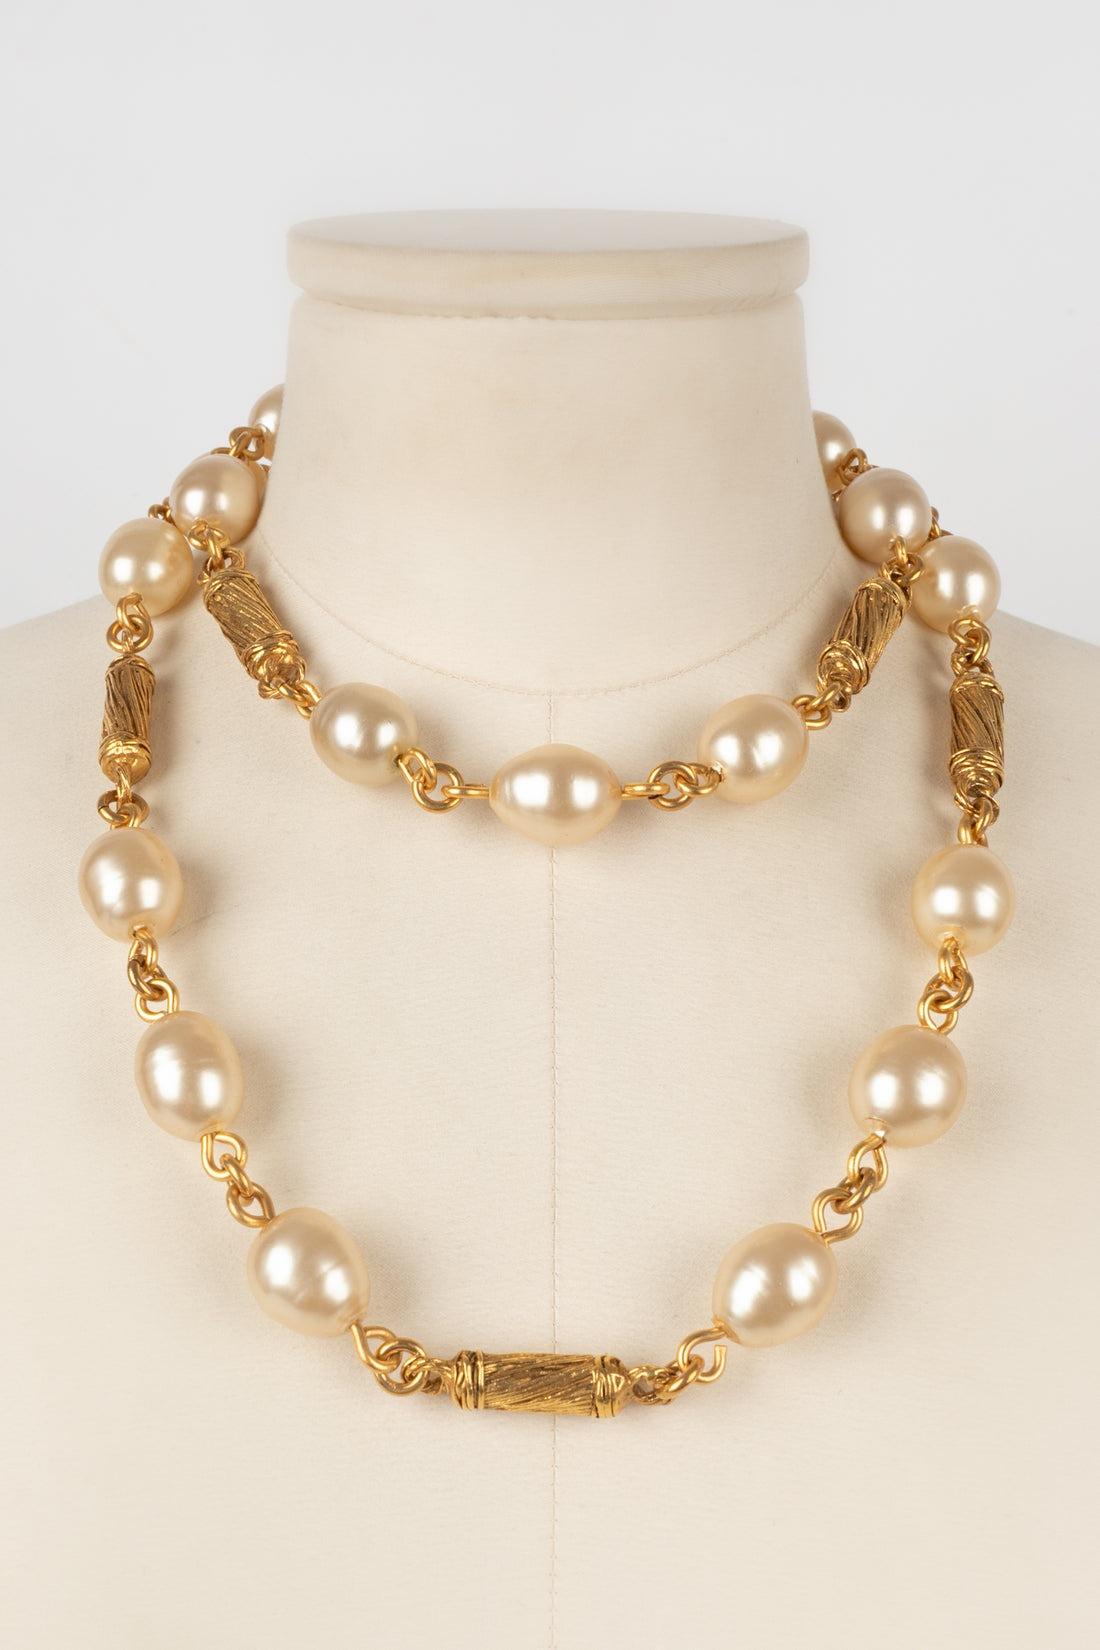 Women's Chanel Necklace Fall, 1994